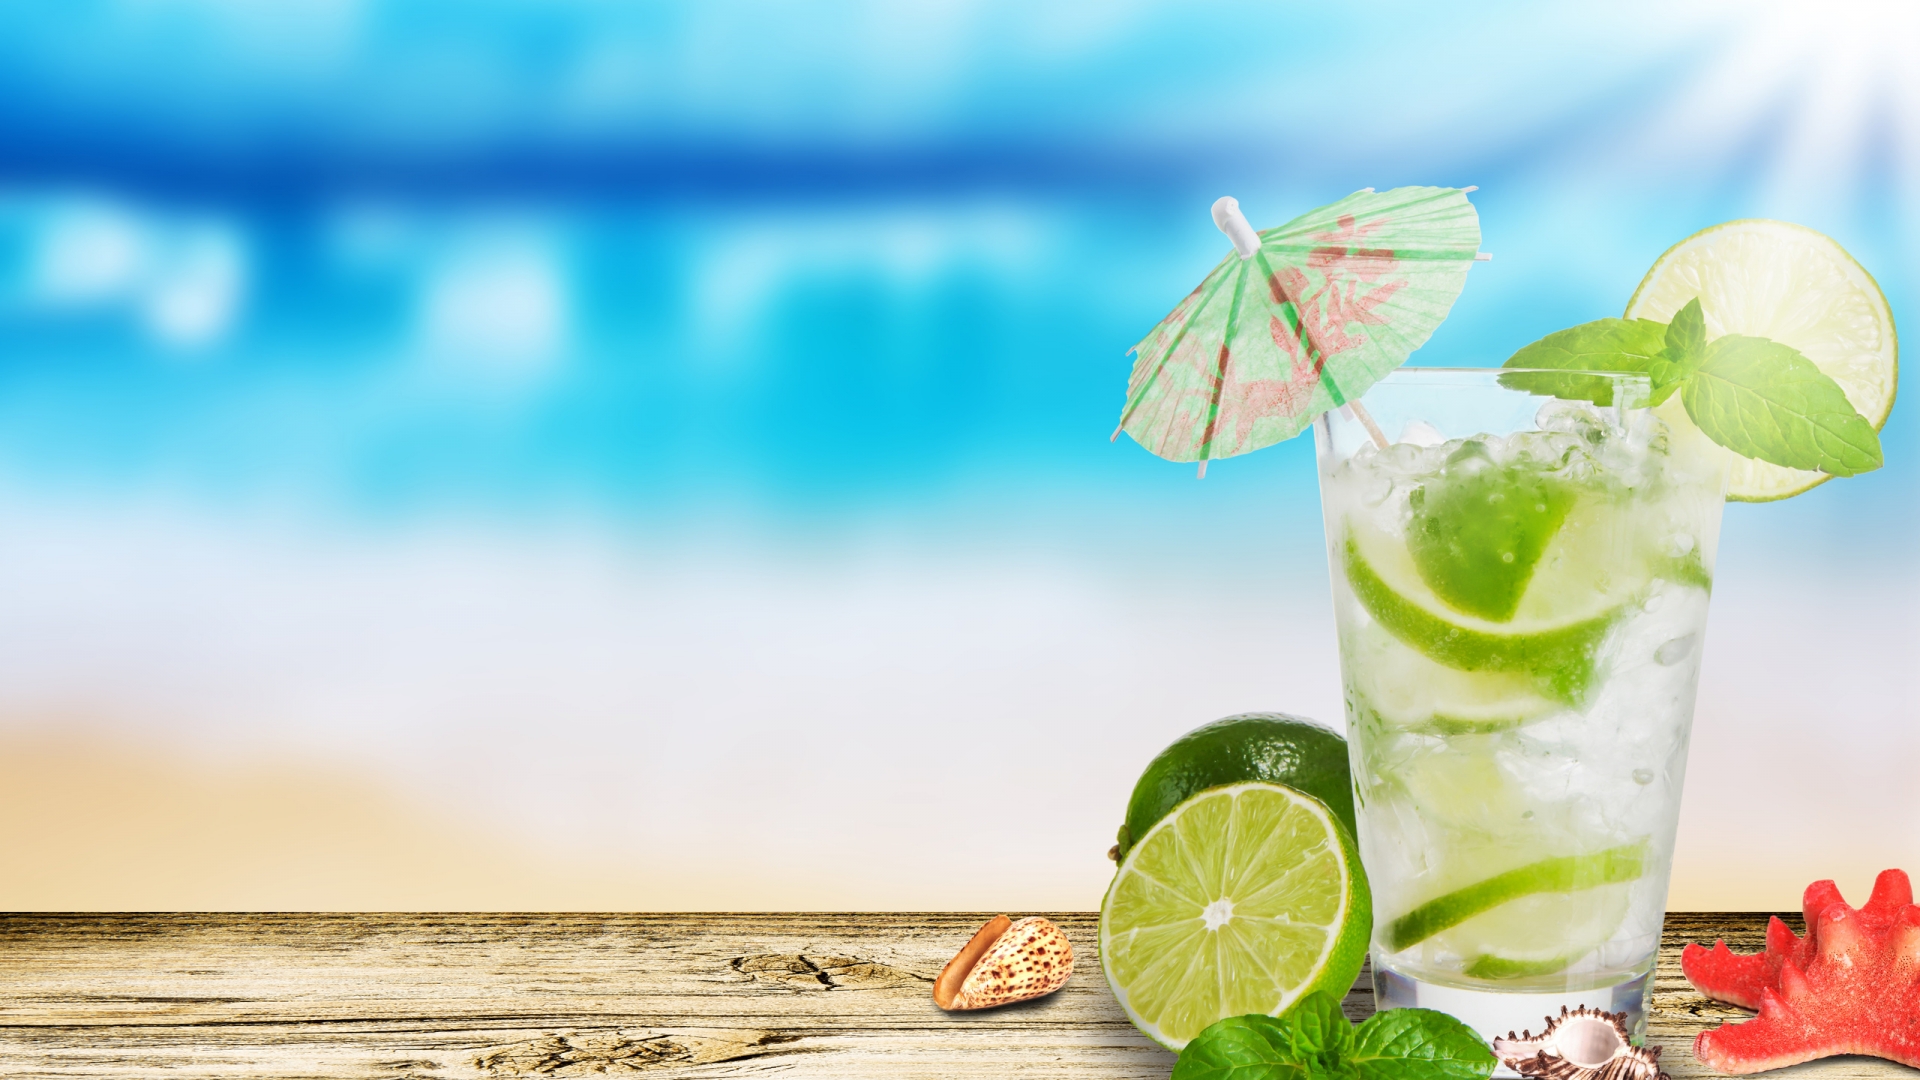 Mojito Cocktail for 1920 x 1080 HDTV 1080p resolution